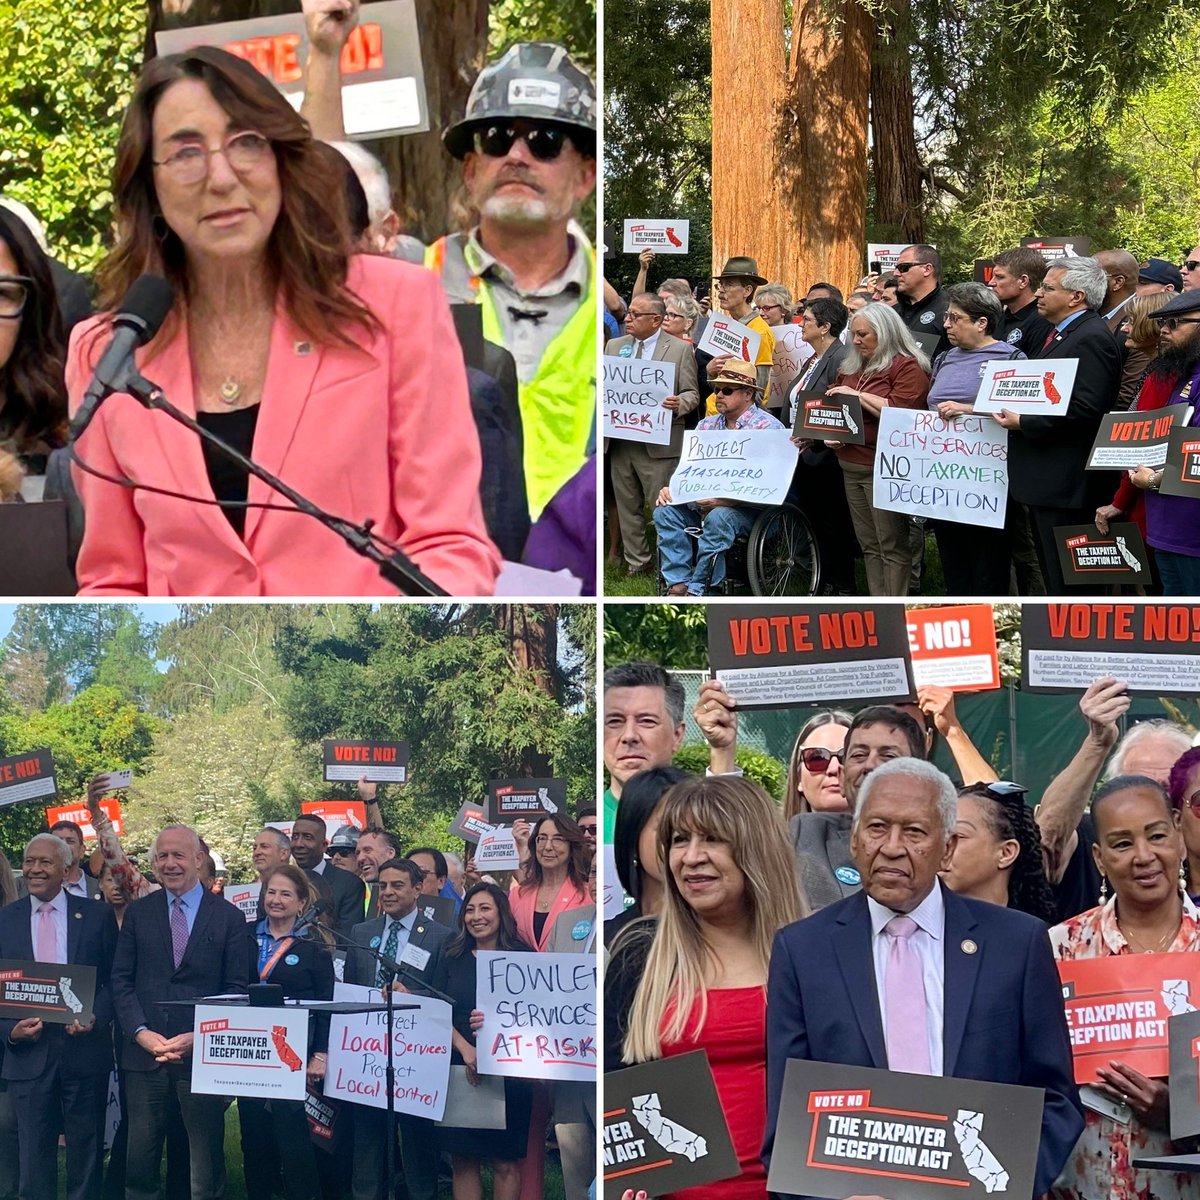 The “No on the Taxpayer Deception Act” coalition press event on the east lawn of the Capital in strong opposition of the misleading CBRT ballot measure. #CACounties joined @CalCities, plus hundreds of union members & community organizations, on this crucial issue! #CSACLeg #CALeg